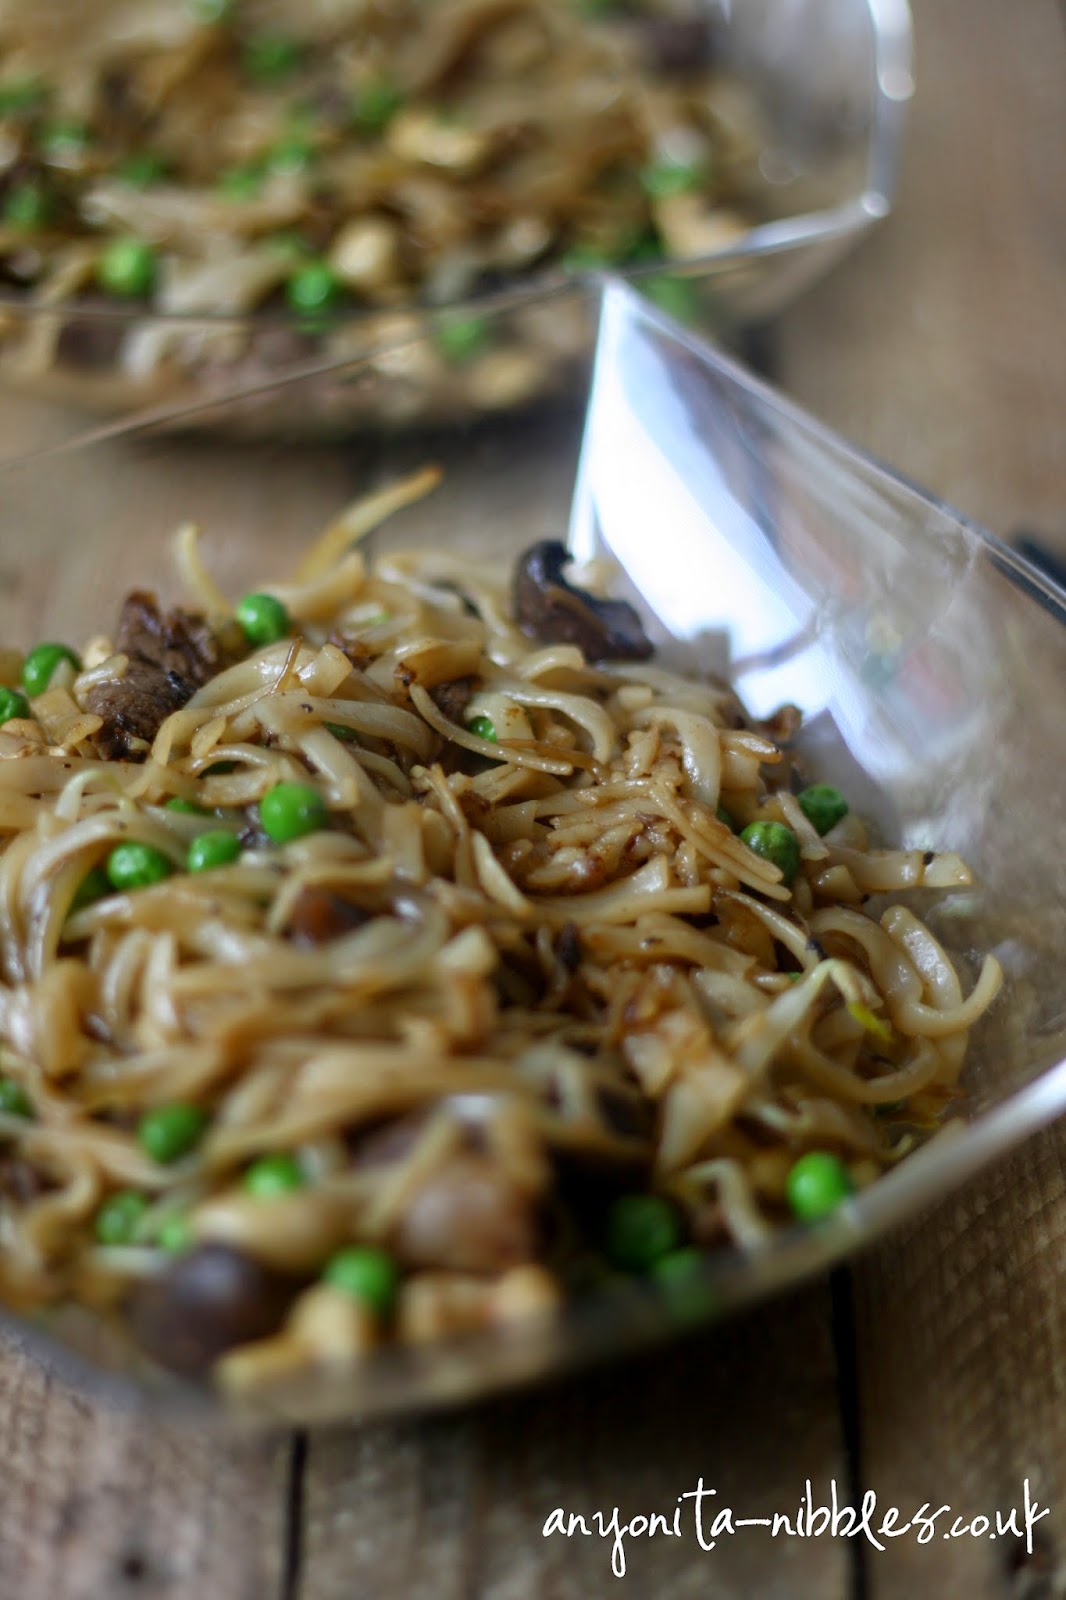 Beef with cashews, mushrooms and bean sprouts from Anyonita-nibbles.co.uk